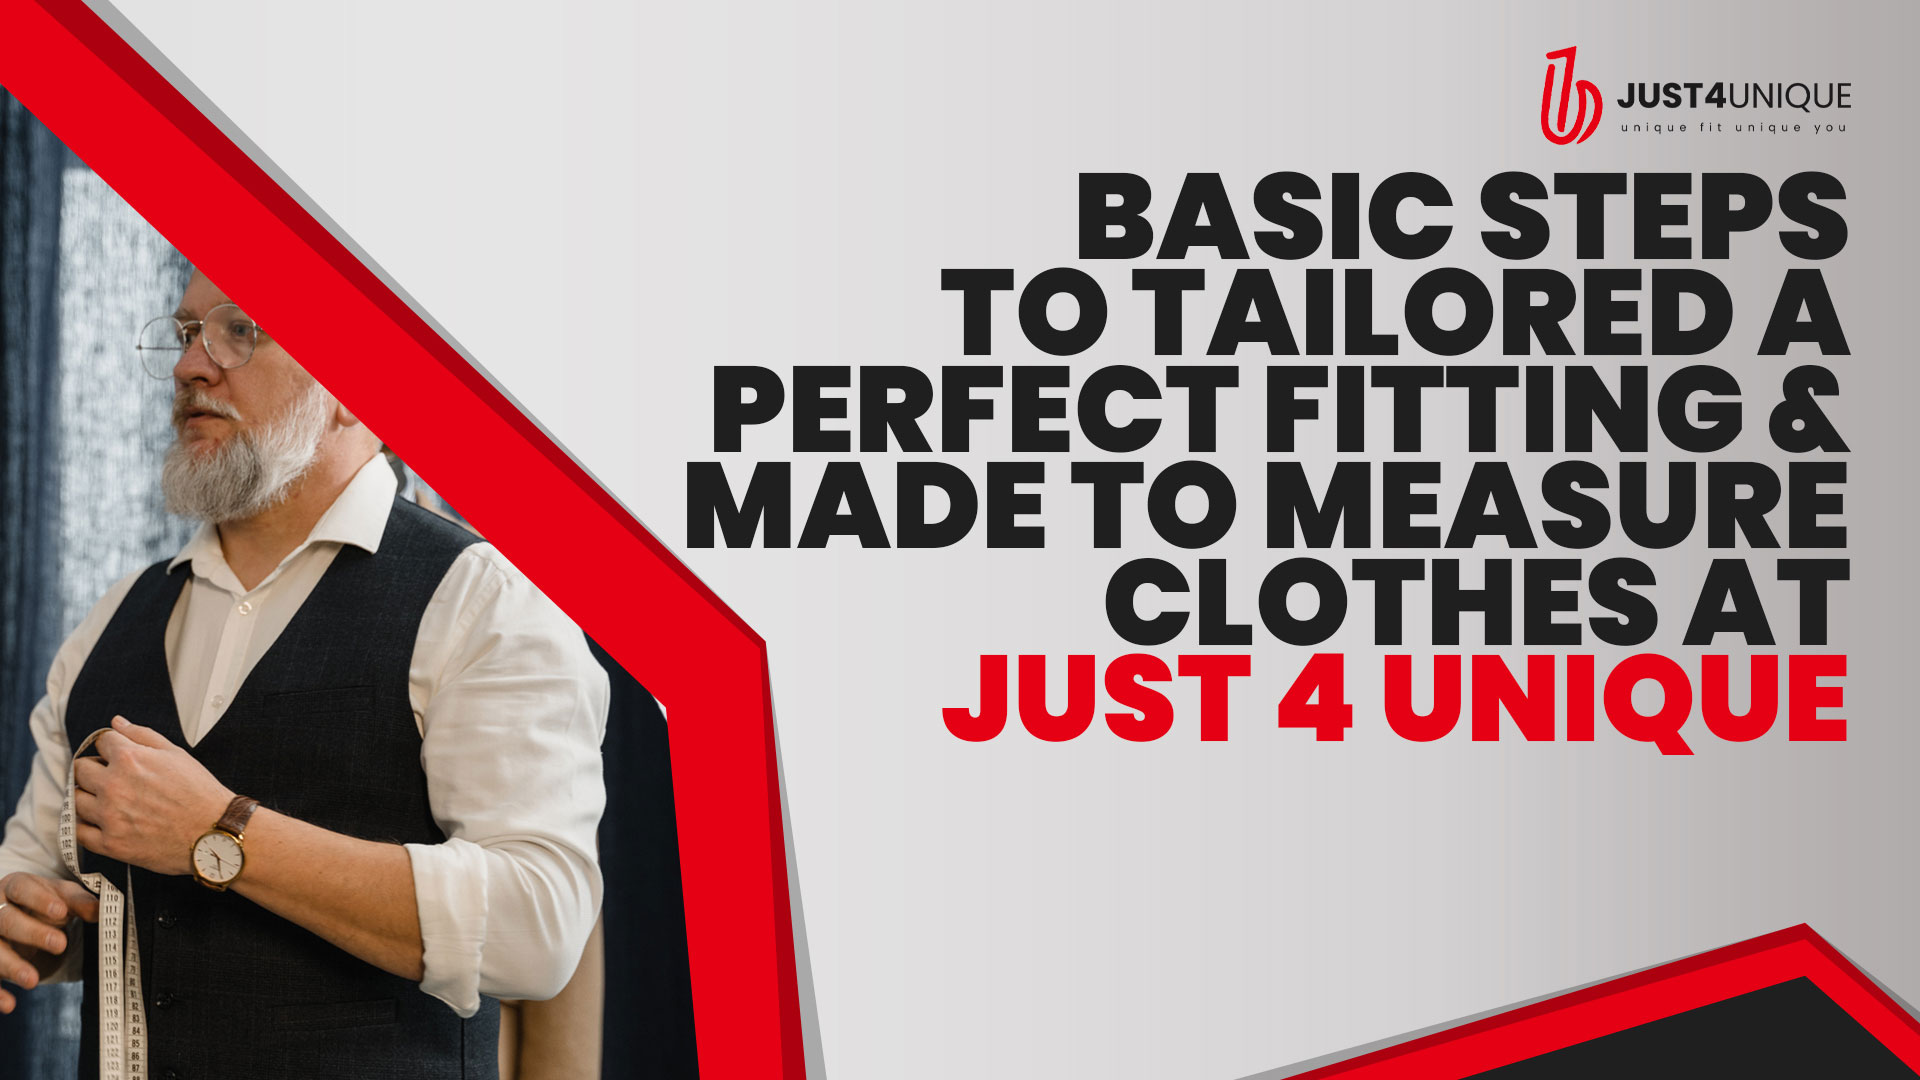 Basic Steps to Tailored a Perfect Fitting and Made to Measure Clothes